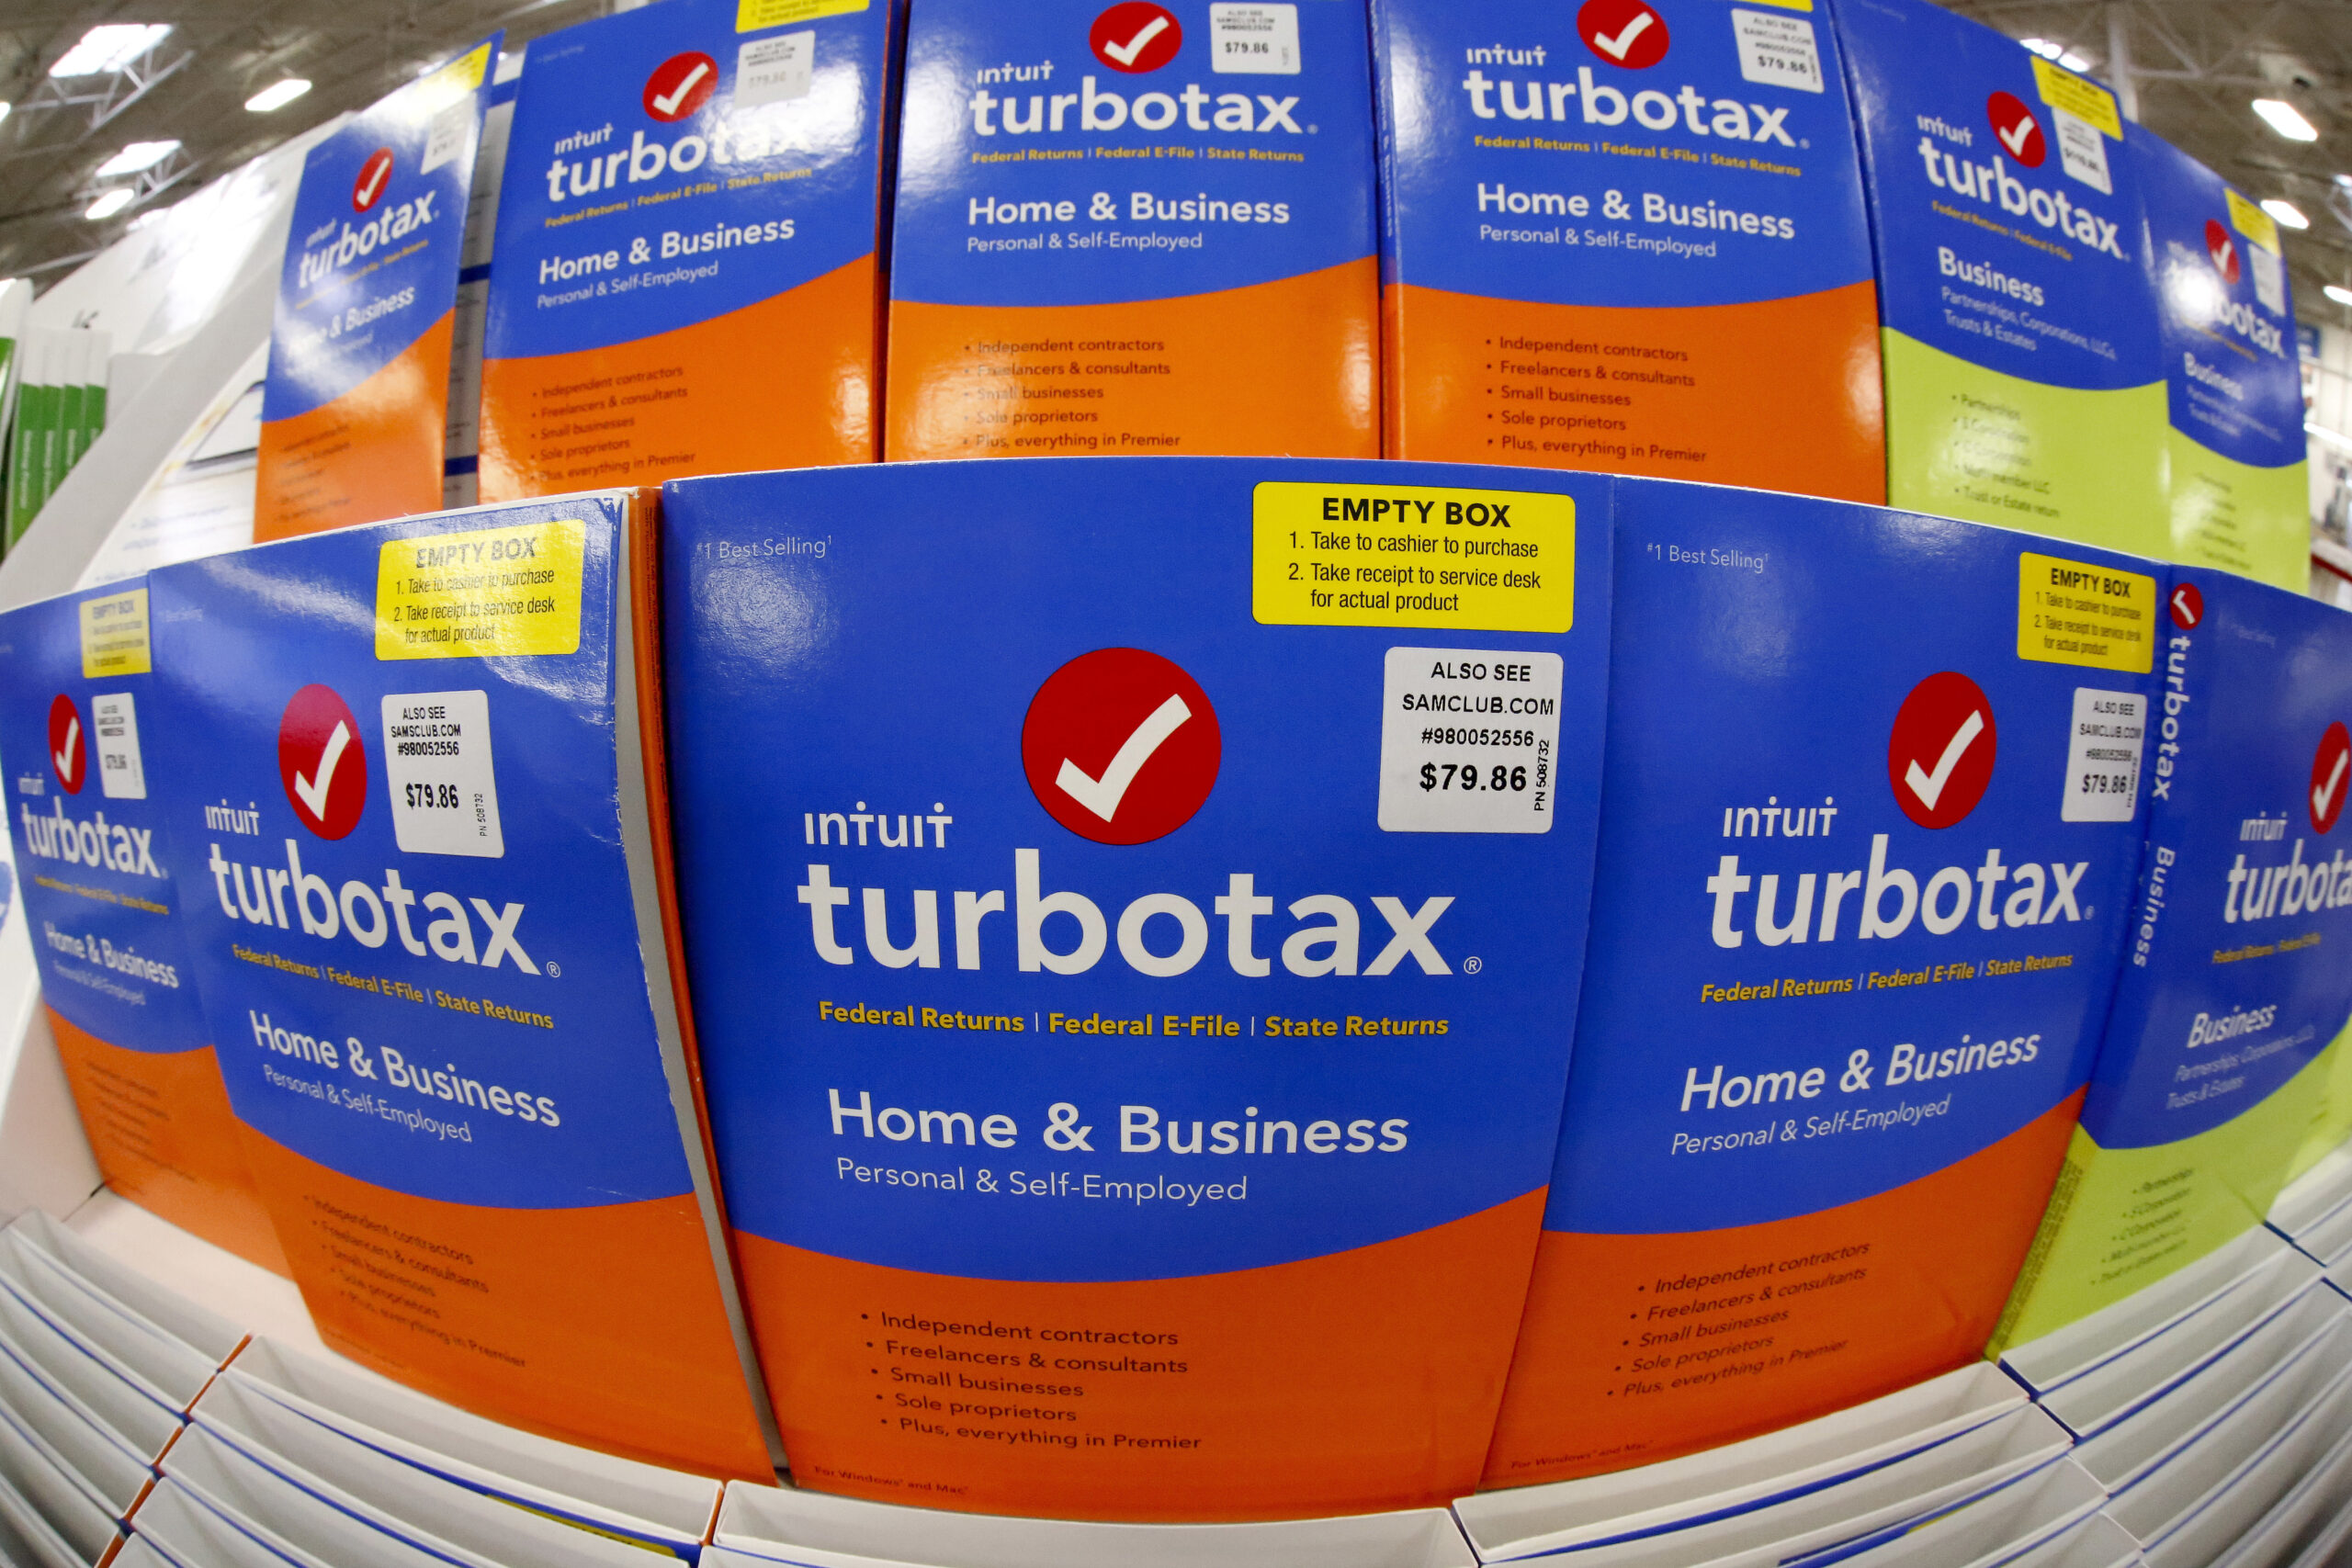 A display of TurboTax software in a store